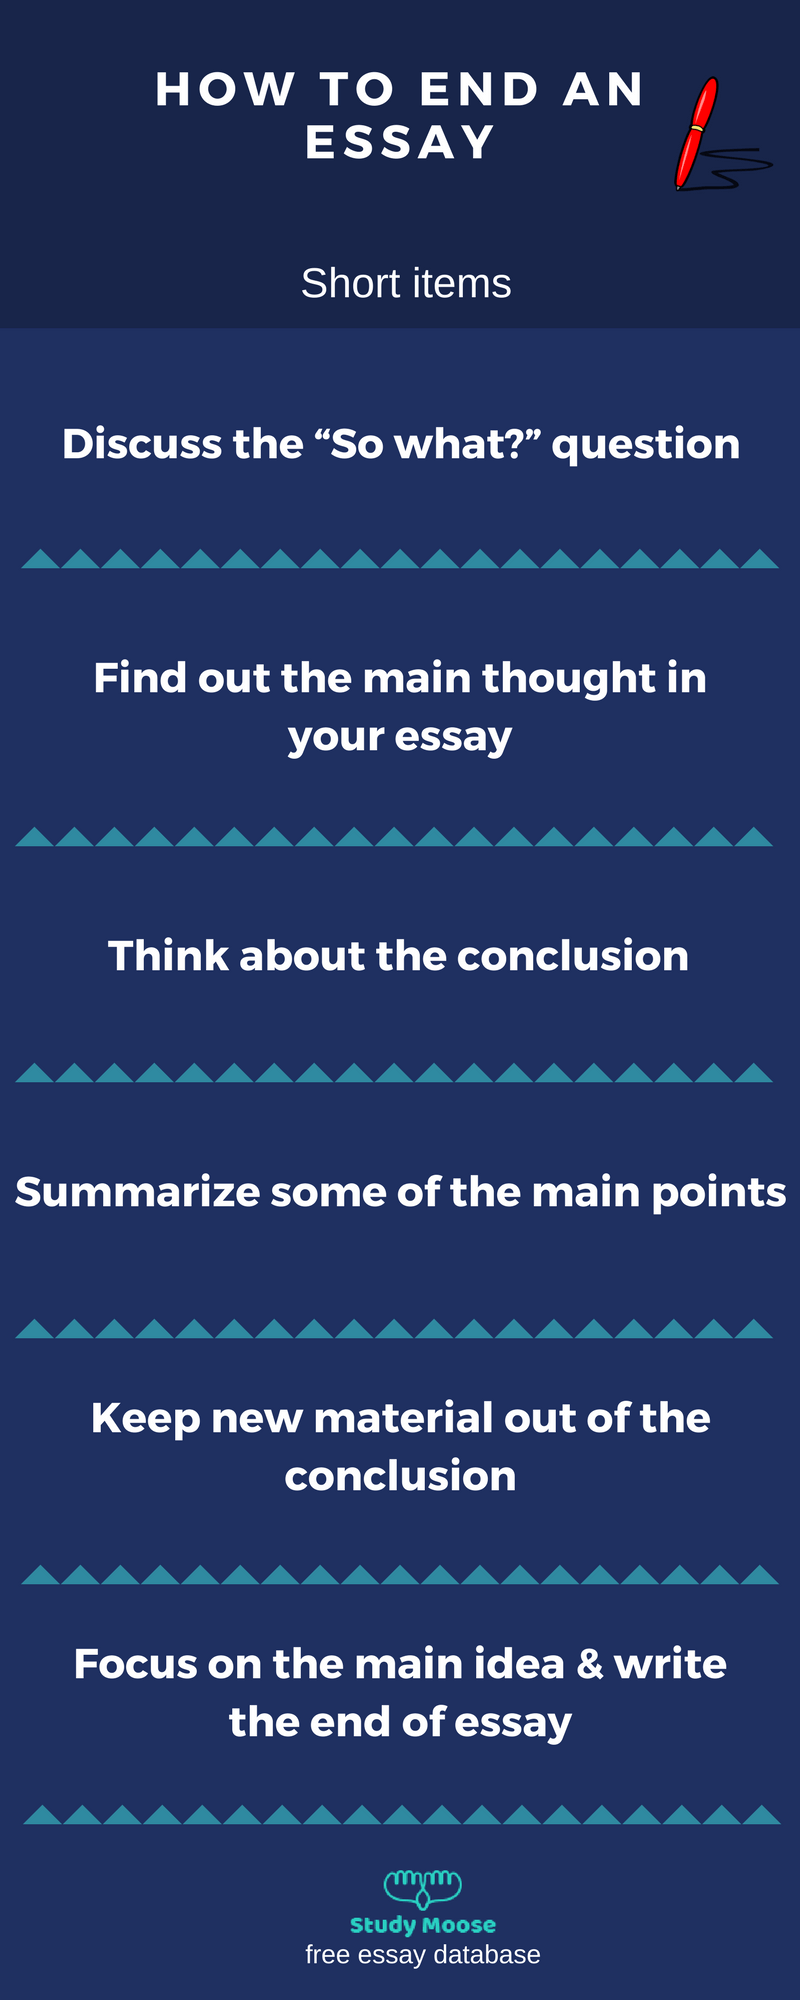 How to End an Essay Infographic